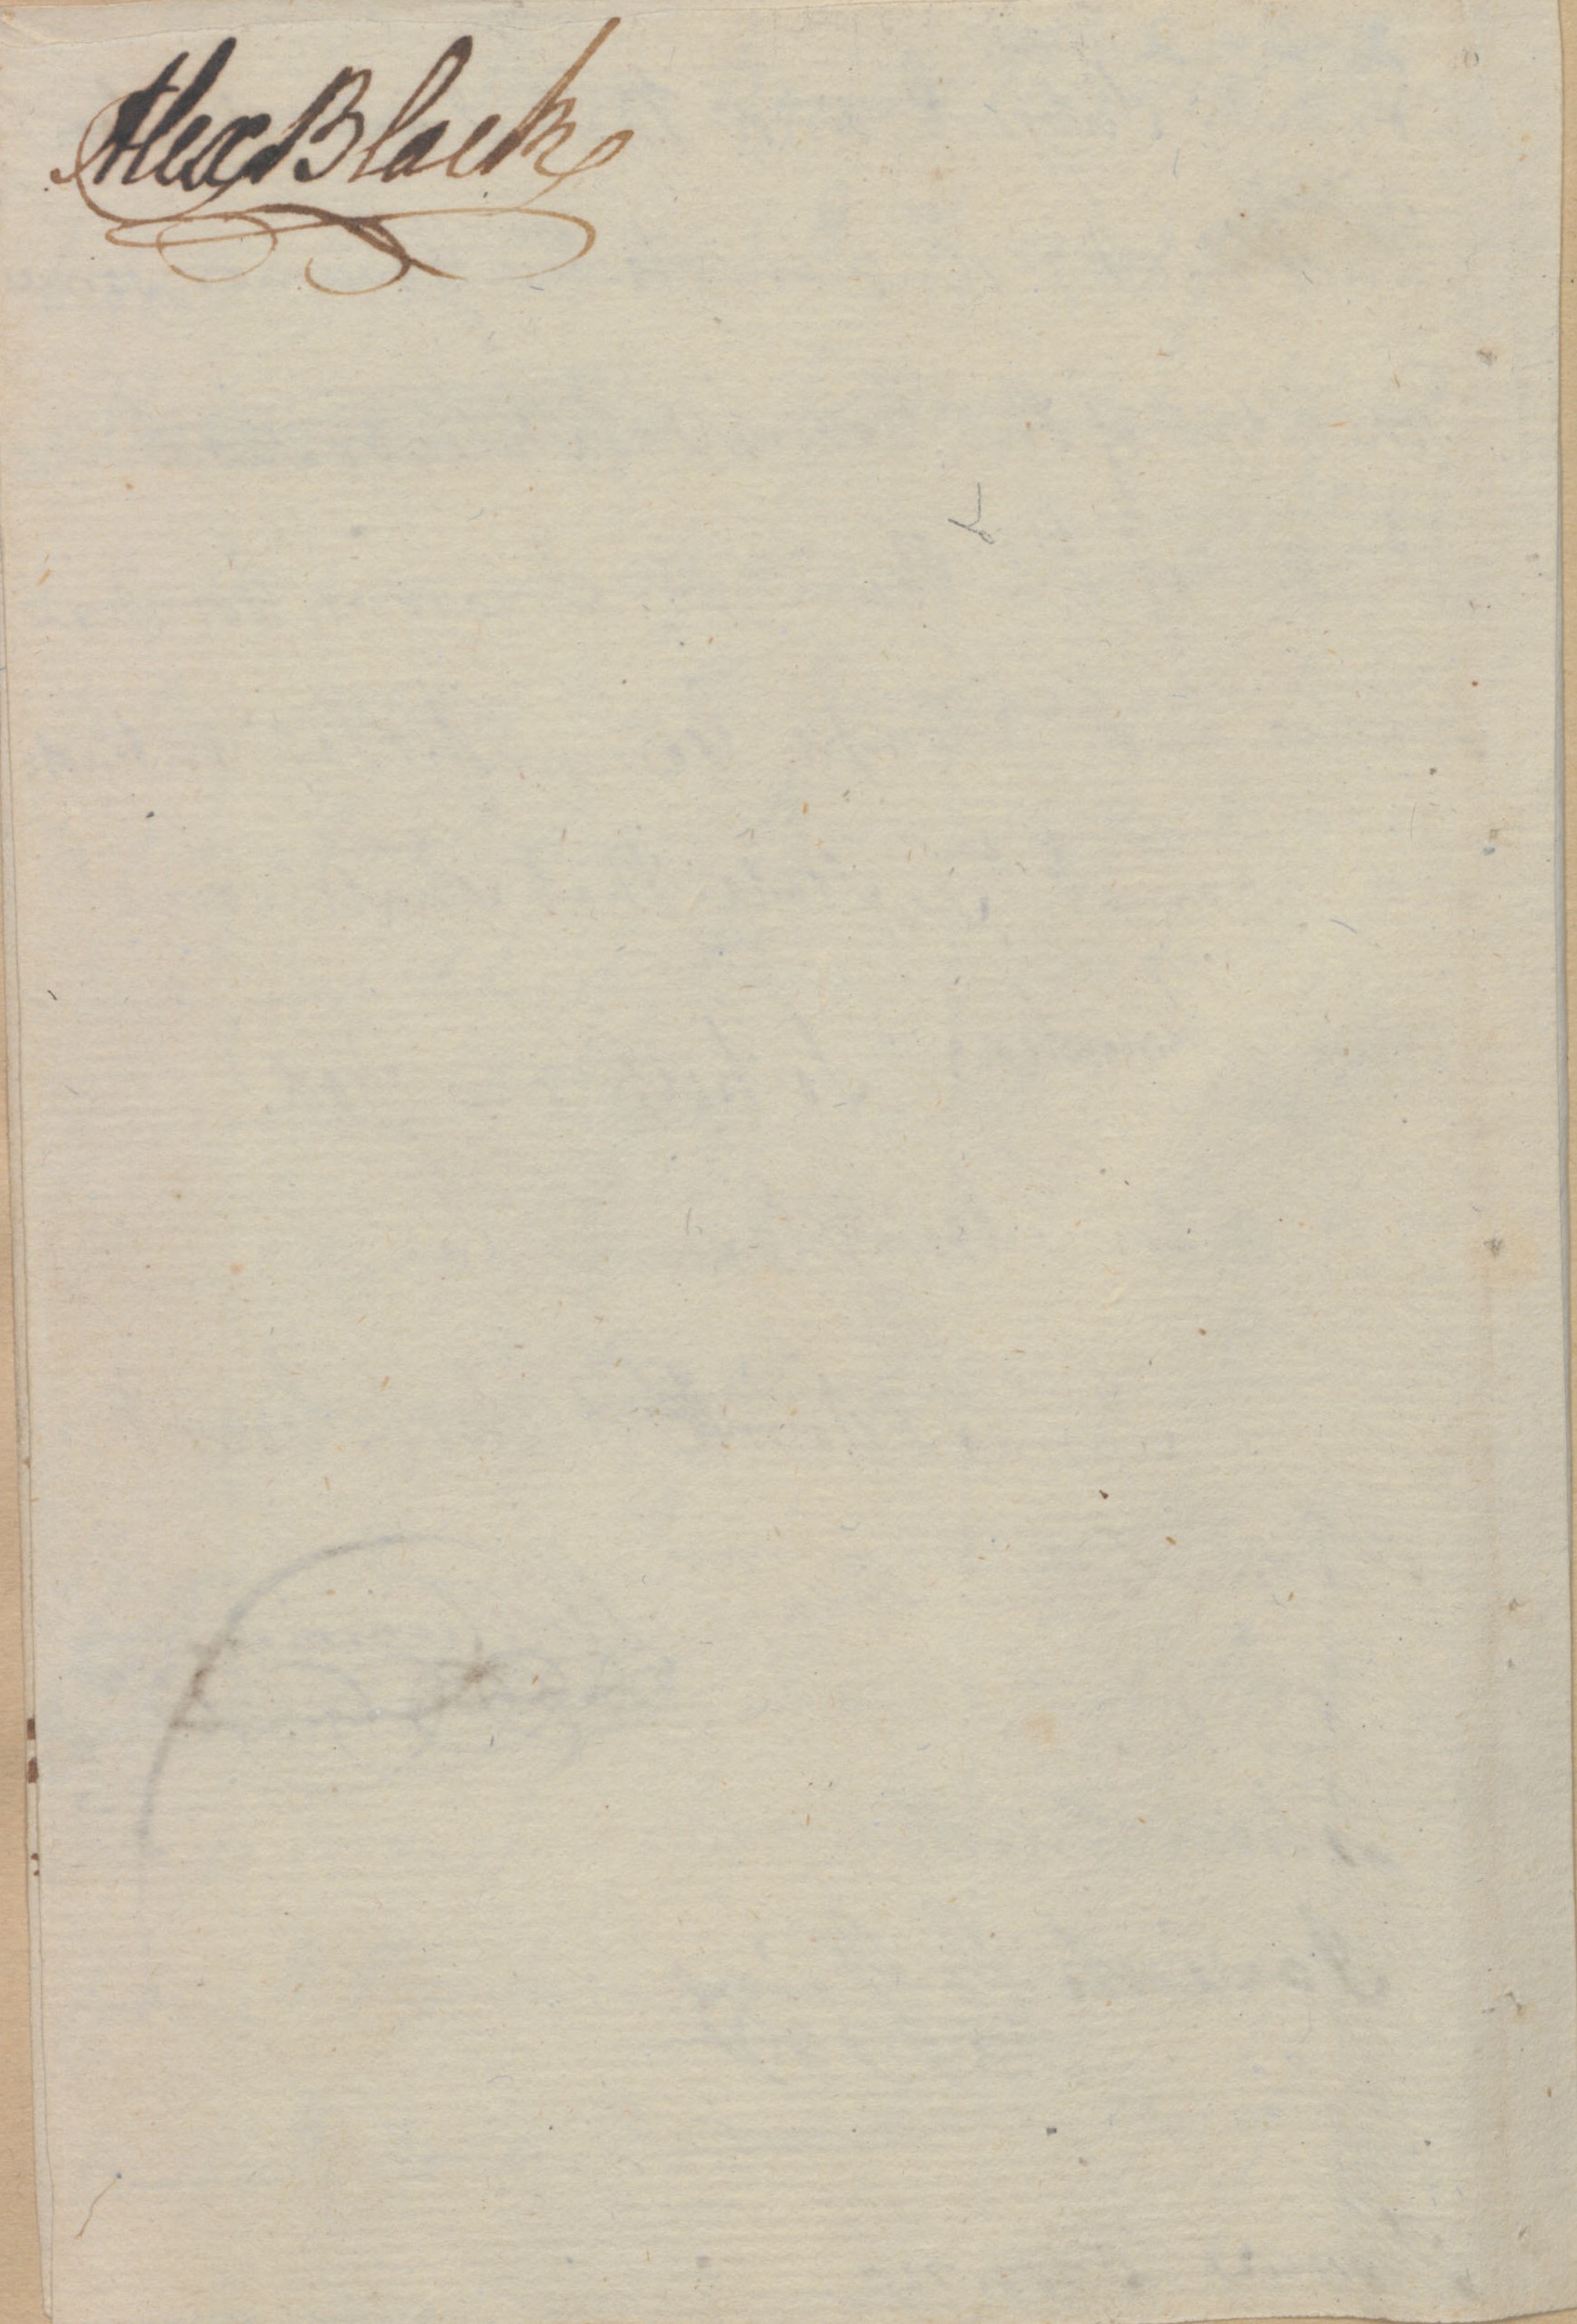 Order of the Chowan County Court, 17 June 1777, page 3